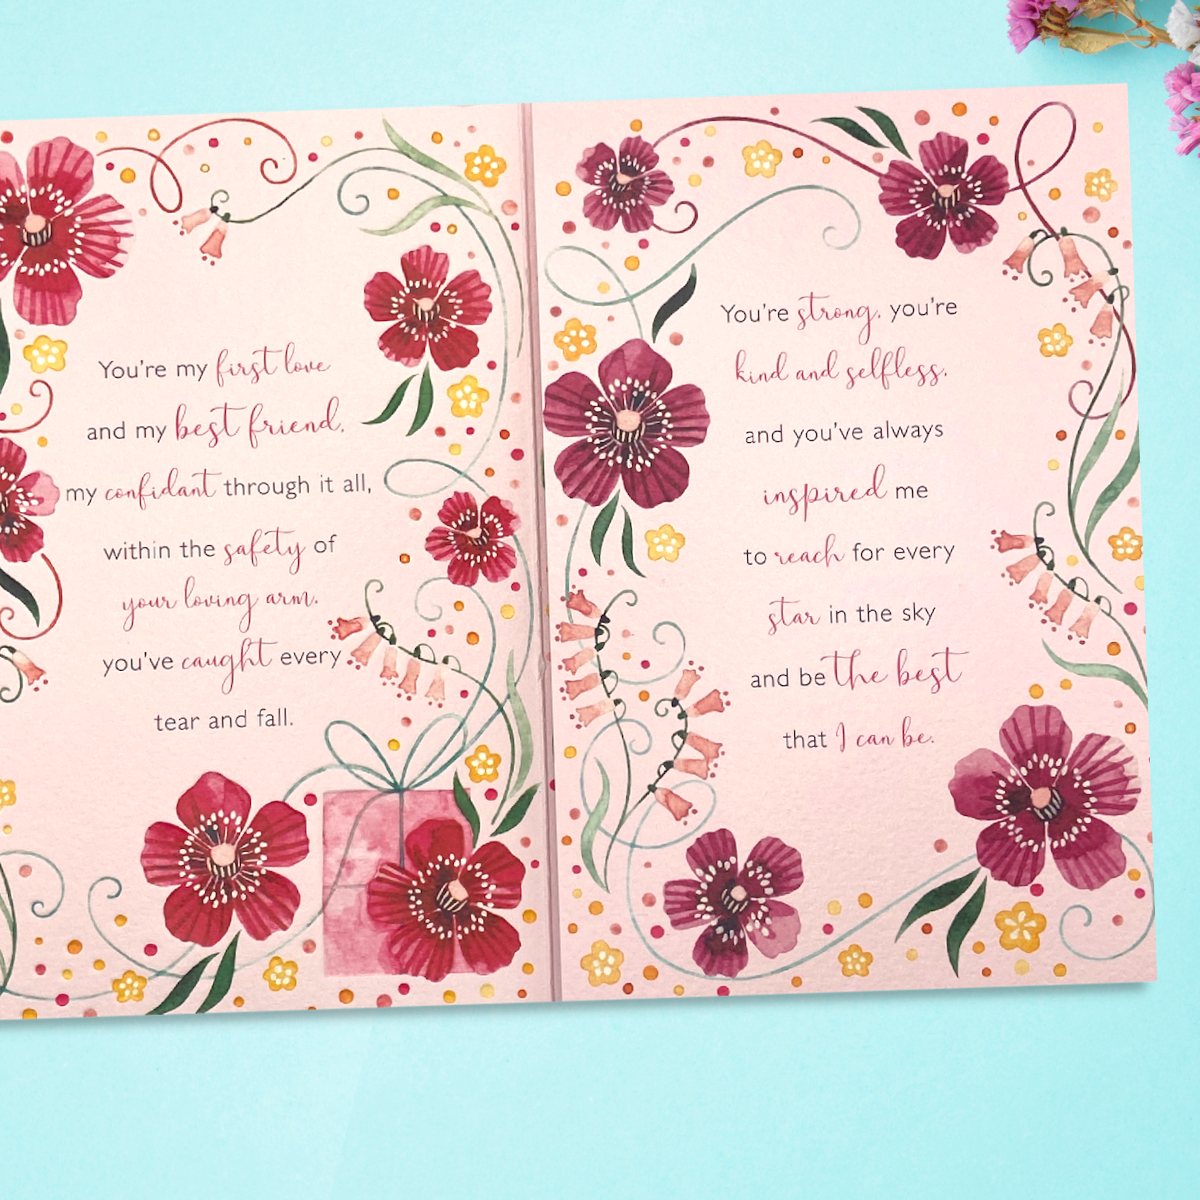 Inside pages with verse and floral borders